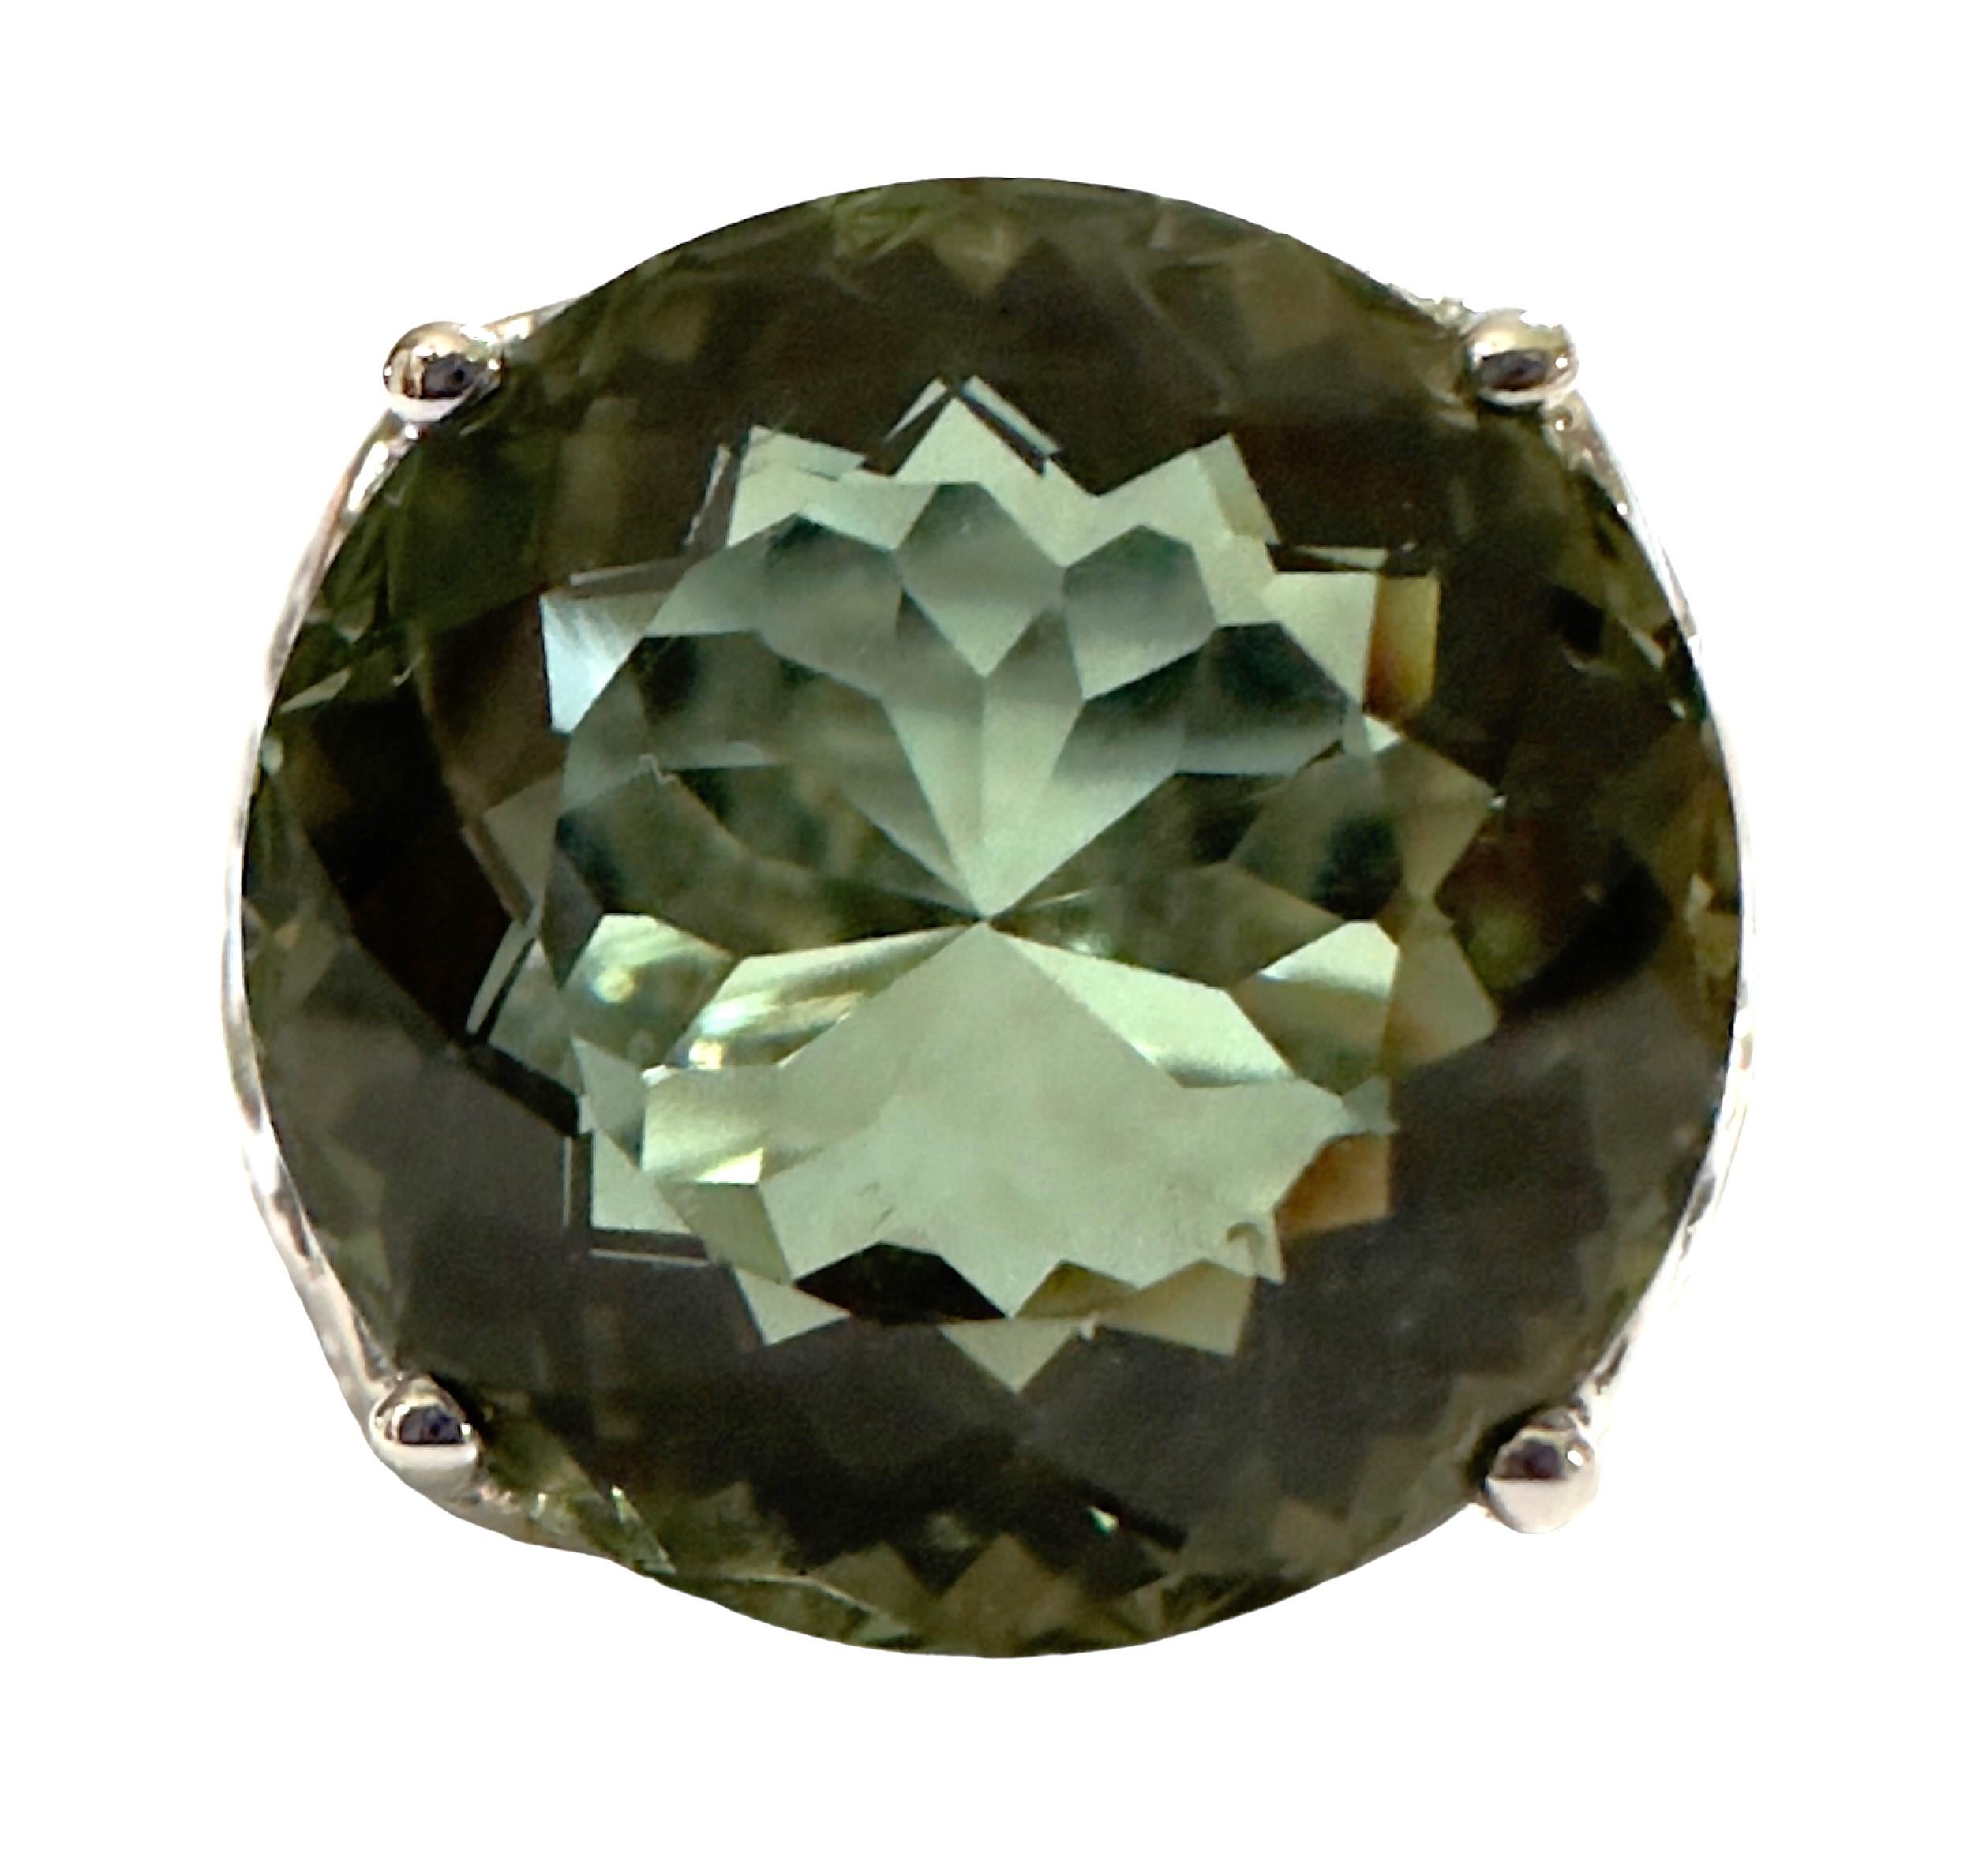 What beautiful stone in this ring!  The ring is a size 6.  The stone is from Brazil and is just exquisite. The 